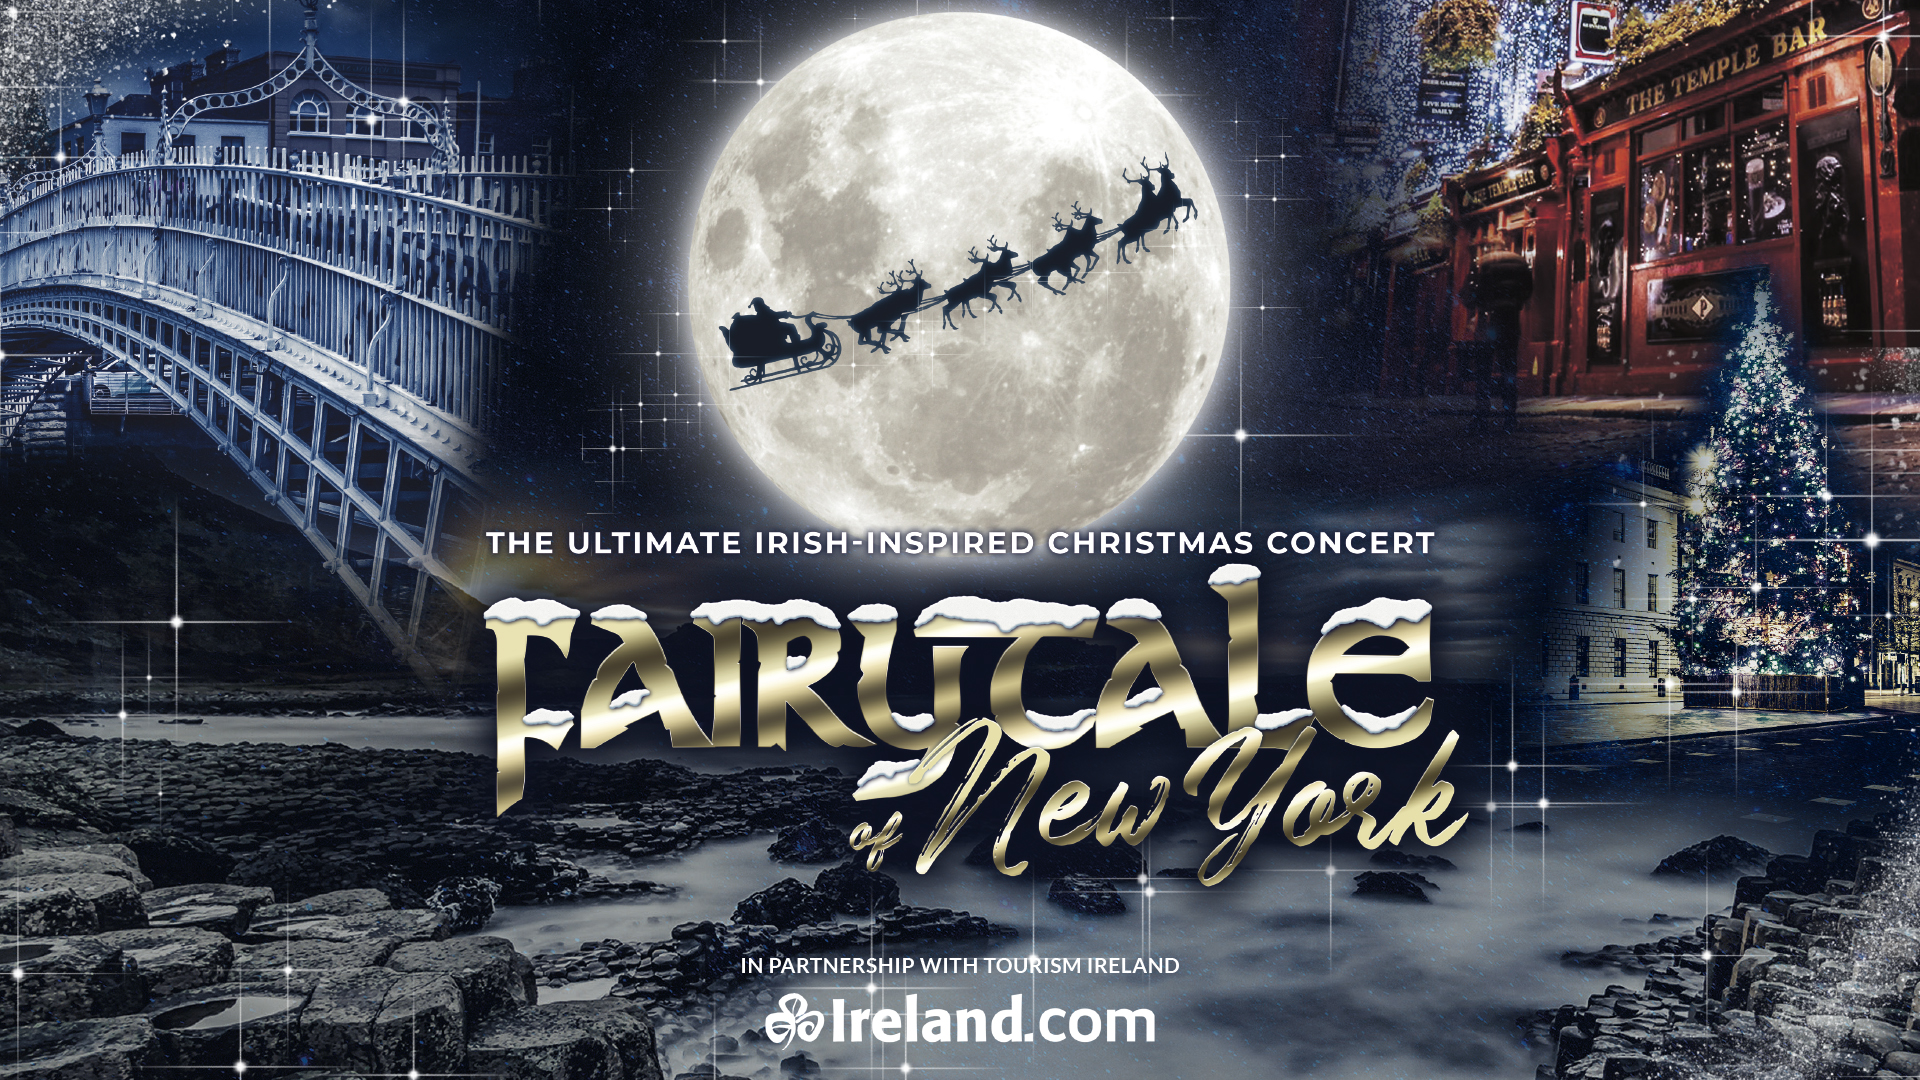 Fairytale of New York logo with Santa, sliegh and reindeers flying across the Moon